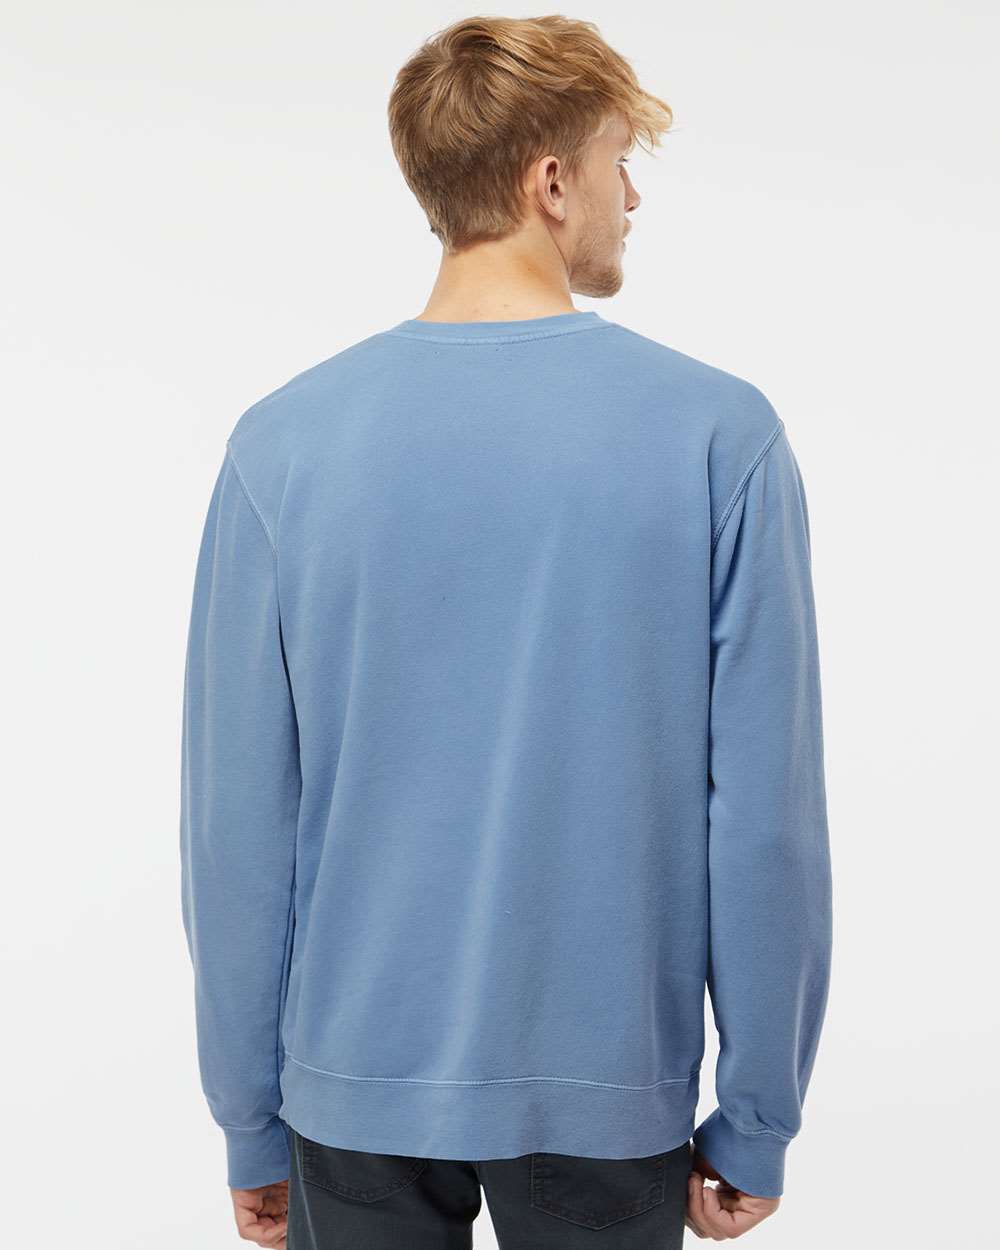 Independent Trading Co. Unisex Midweight Pigment-Dyed Crewneck Sweatshirt PRM3500 #colormdl_Pigment Light Blue